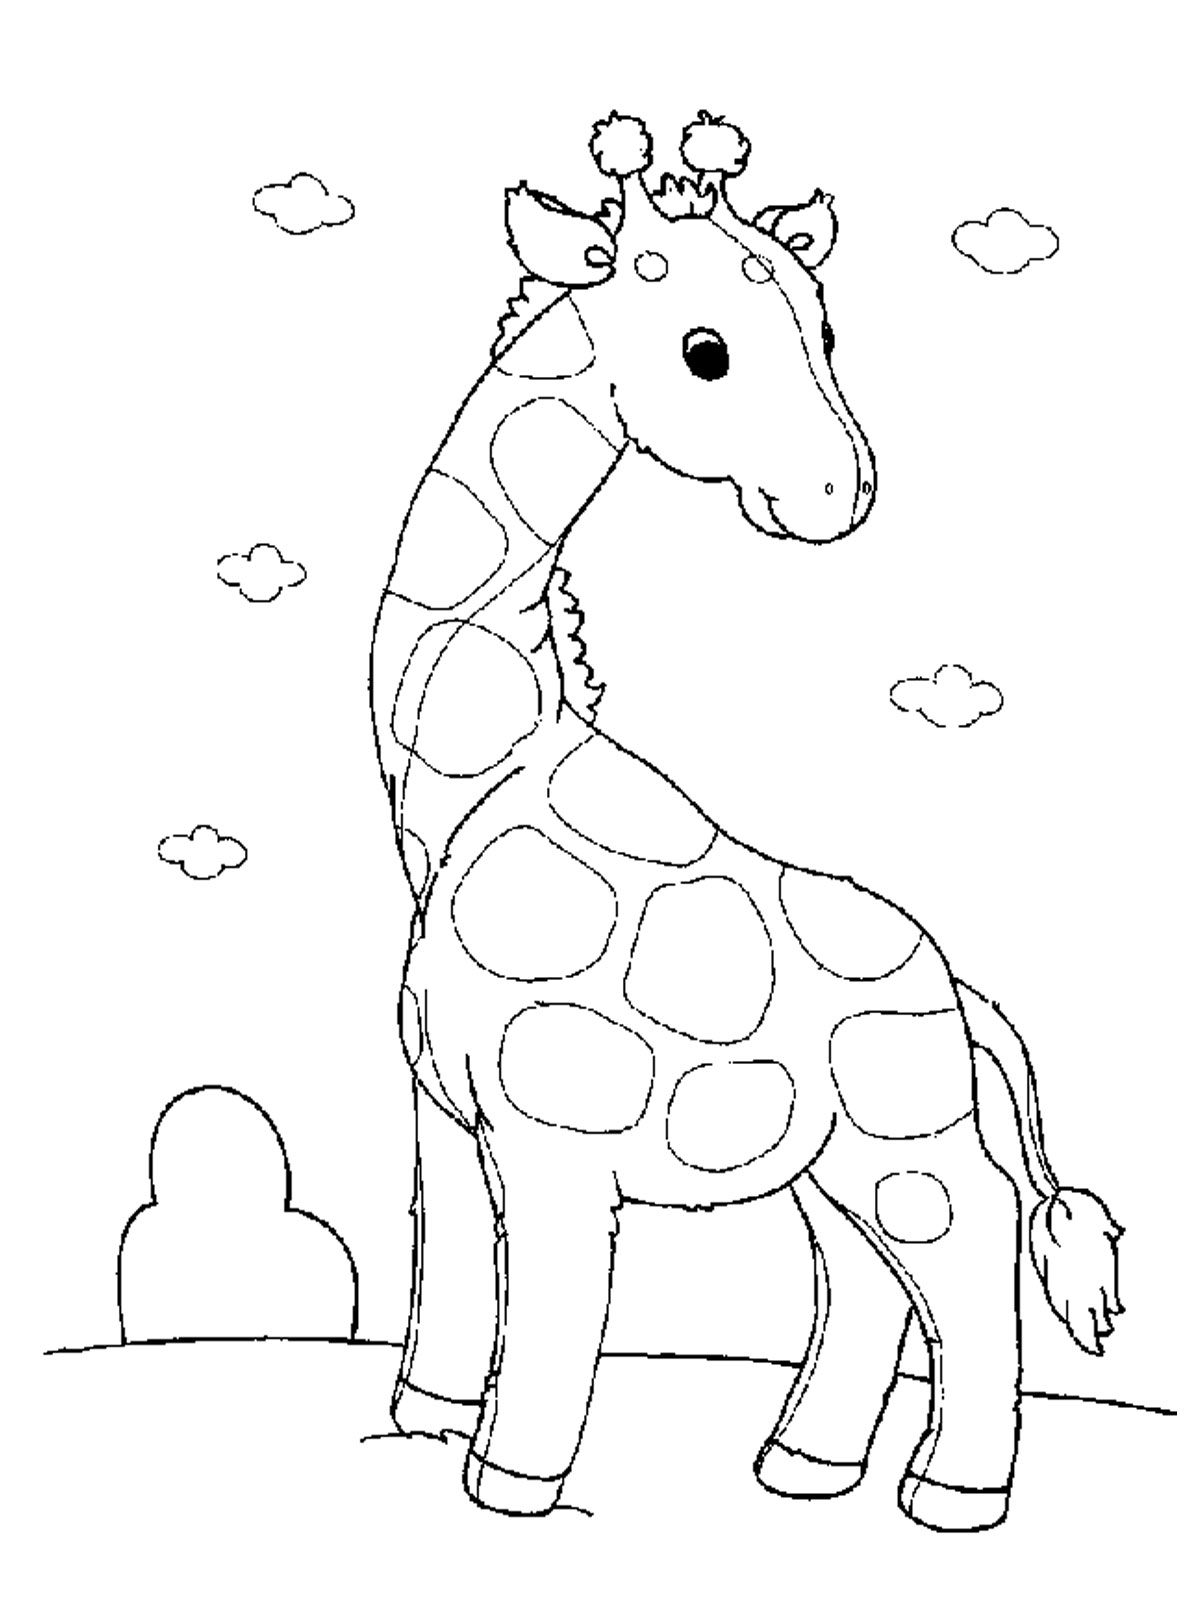 Baby Giraffes Coloring Page